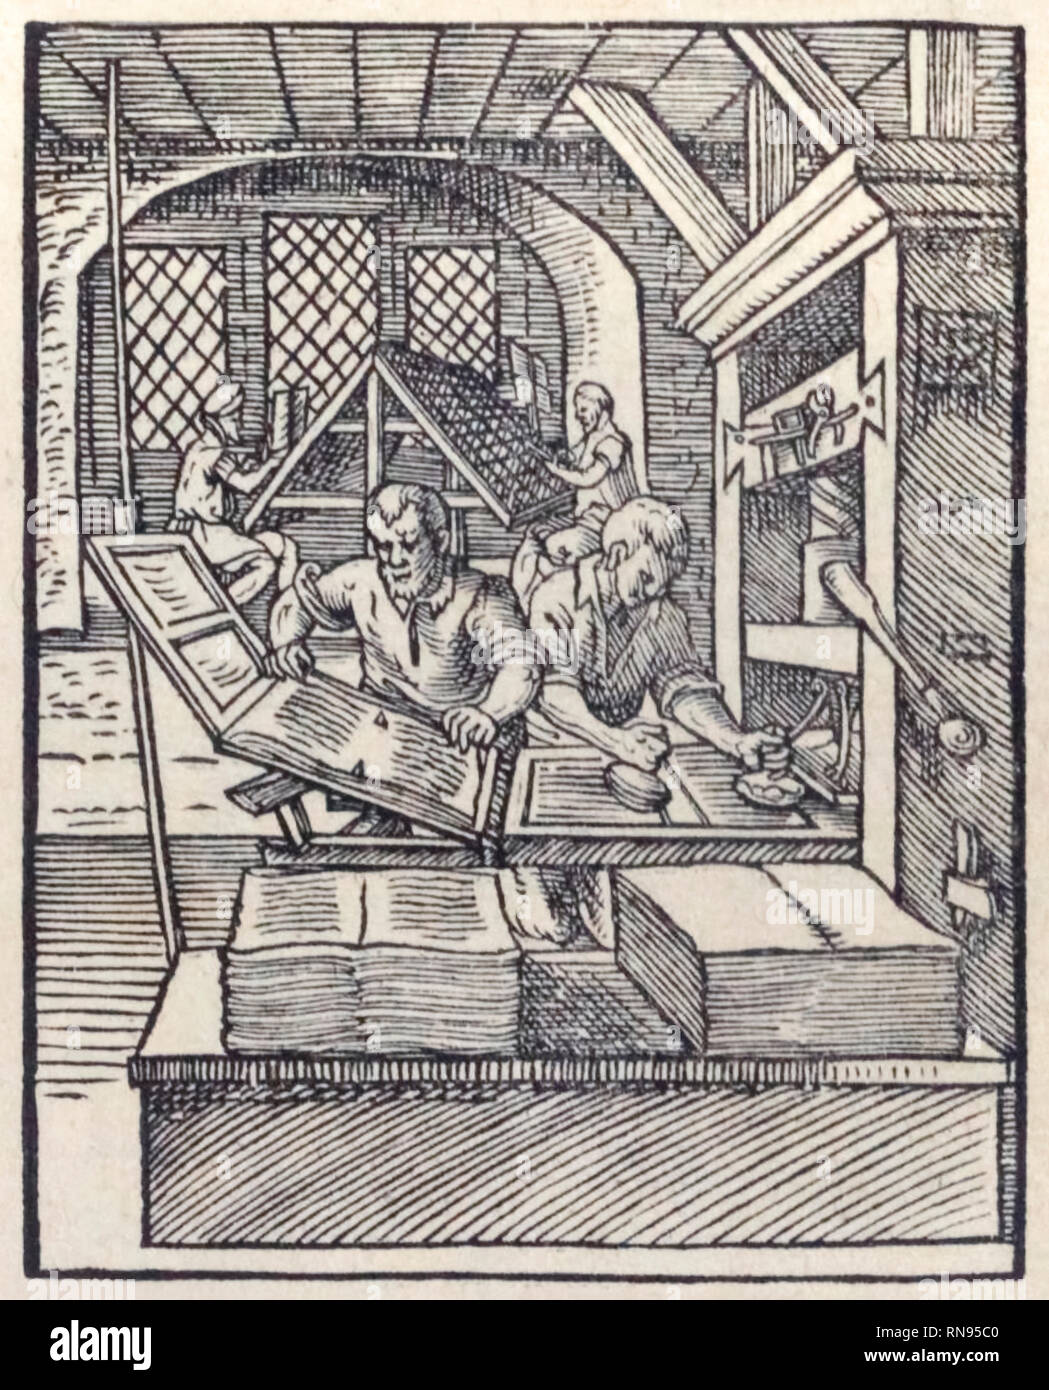 Printer’s workshop showing setting of type in background and puller and hand printing with finished pages ready for binding. From ‘[Panoplia] omnium illiberalium mechanicarum’ by Hartmann Schopper (1542-1595) printed in Frankfurt, Germany in 1568. Stock Photo